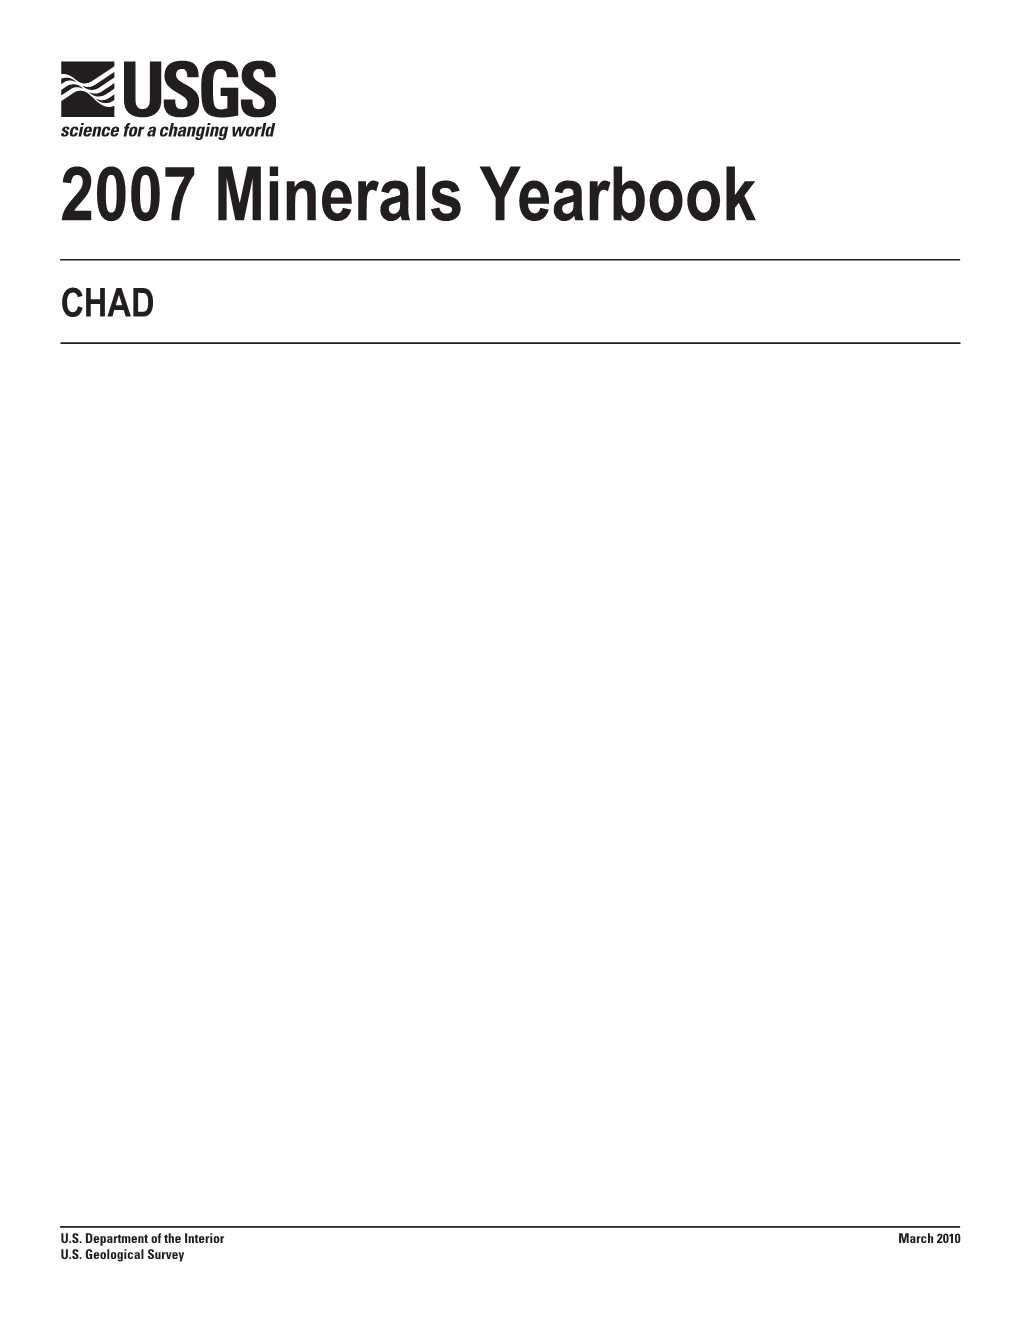 The Mineral Industry of Chad in 2007